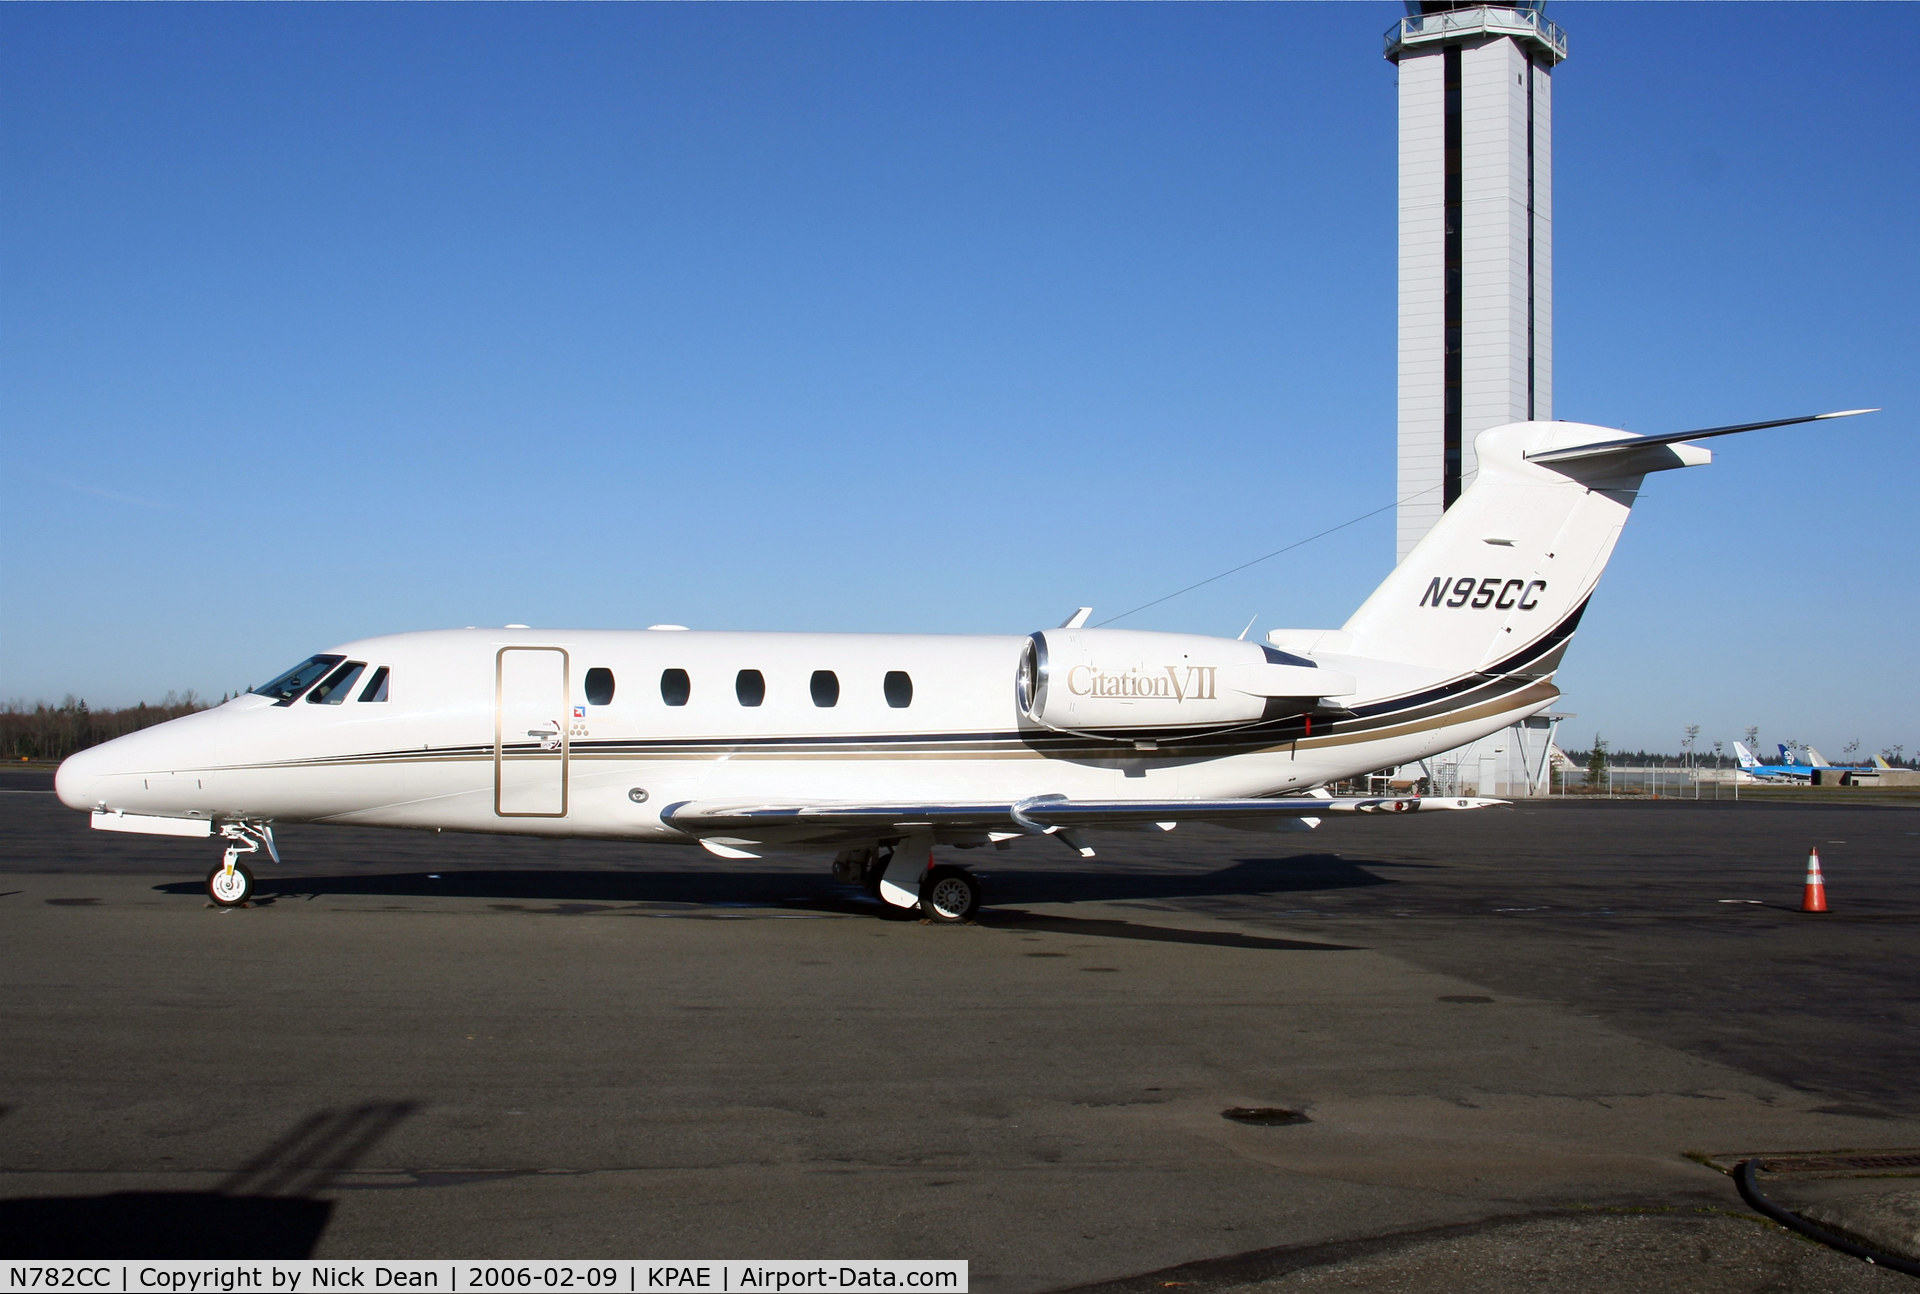 N782CC, 1993 Cessna 650 C/N 650-7030, KPAE (Seen here as N95CC which has been used on 25 different airframes to date and currently carried by an Excel this Citation VII is currently registered N782CC as posted)